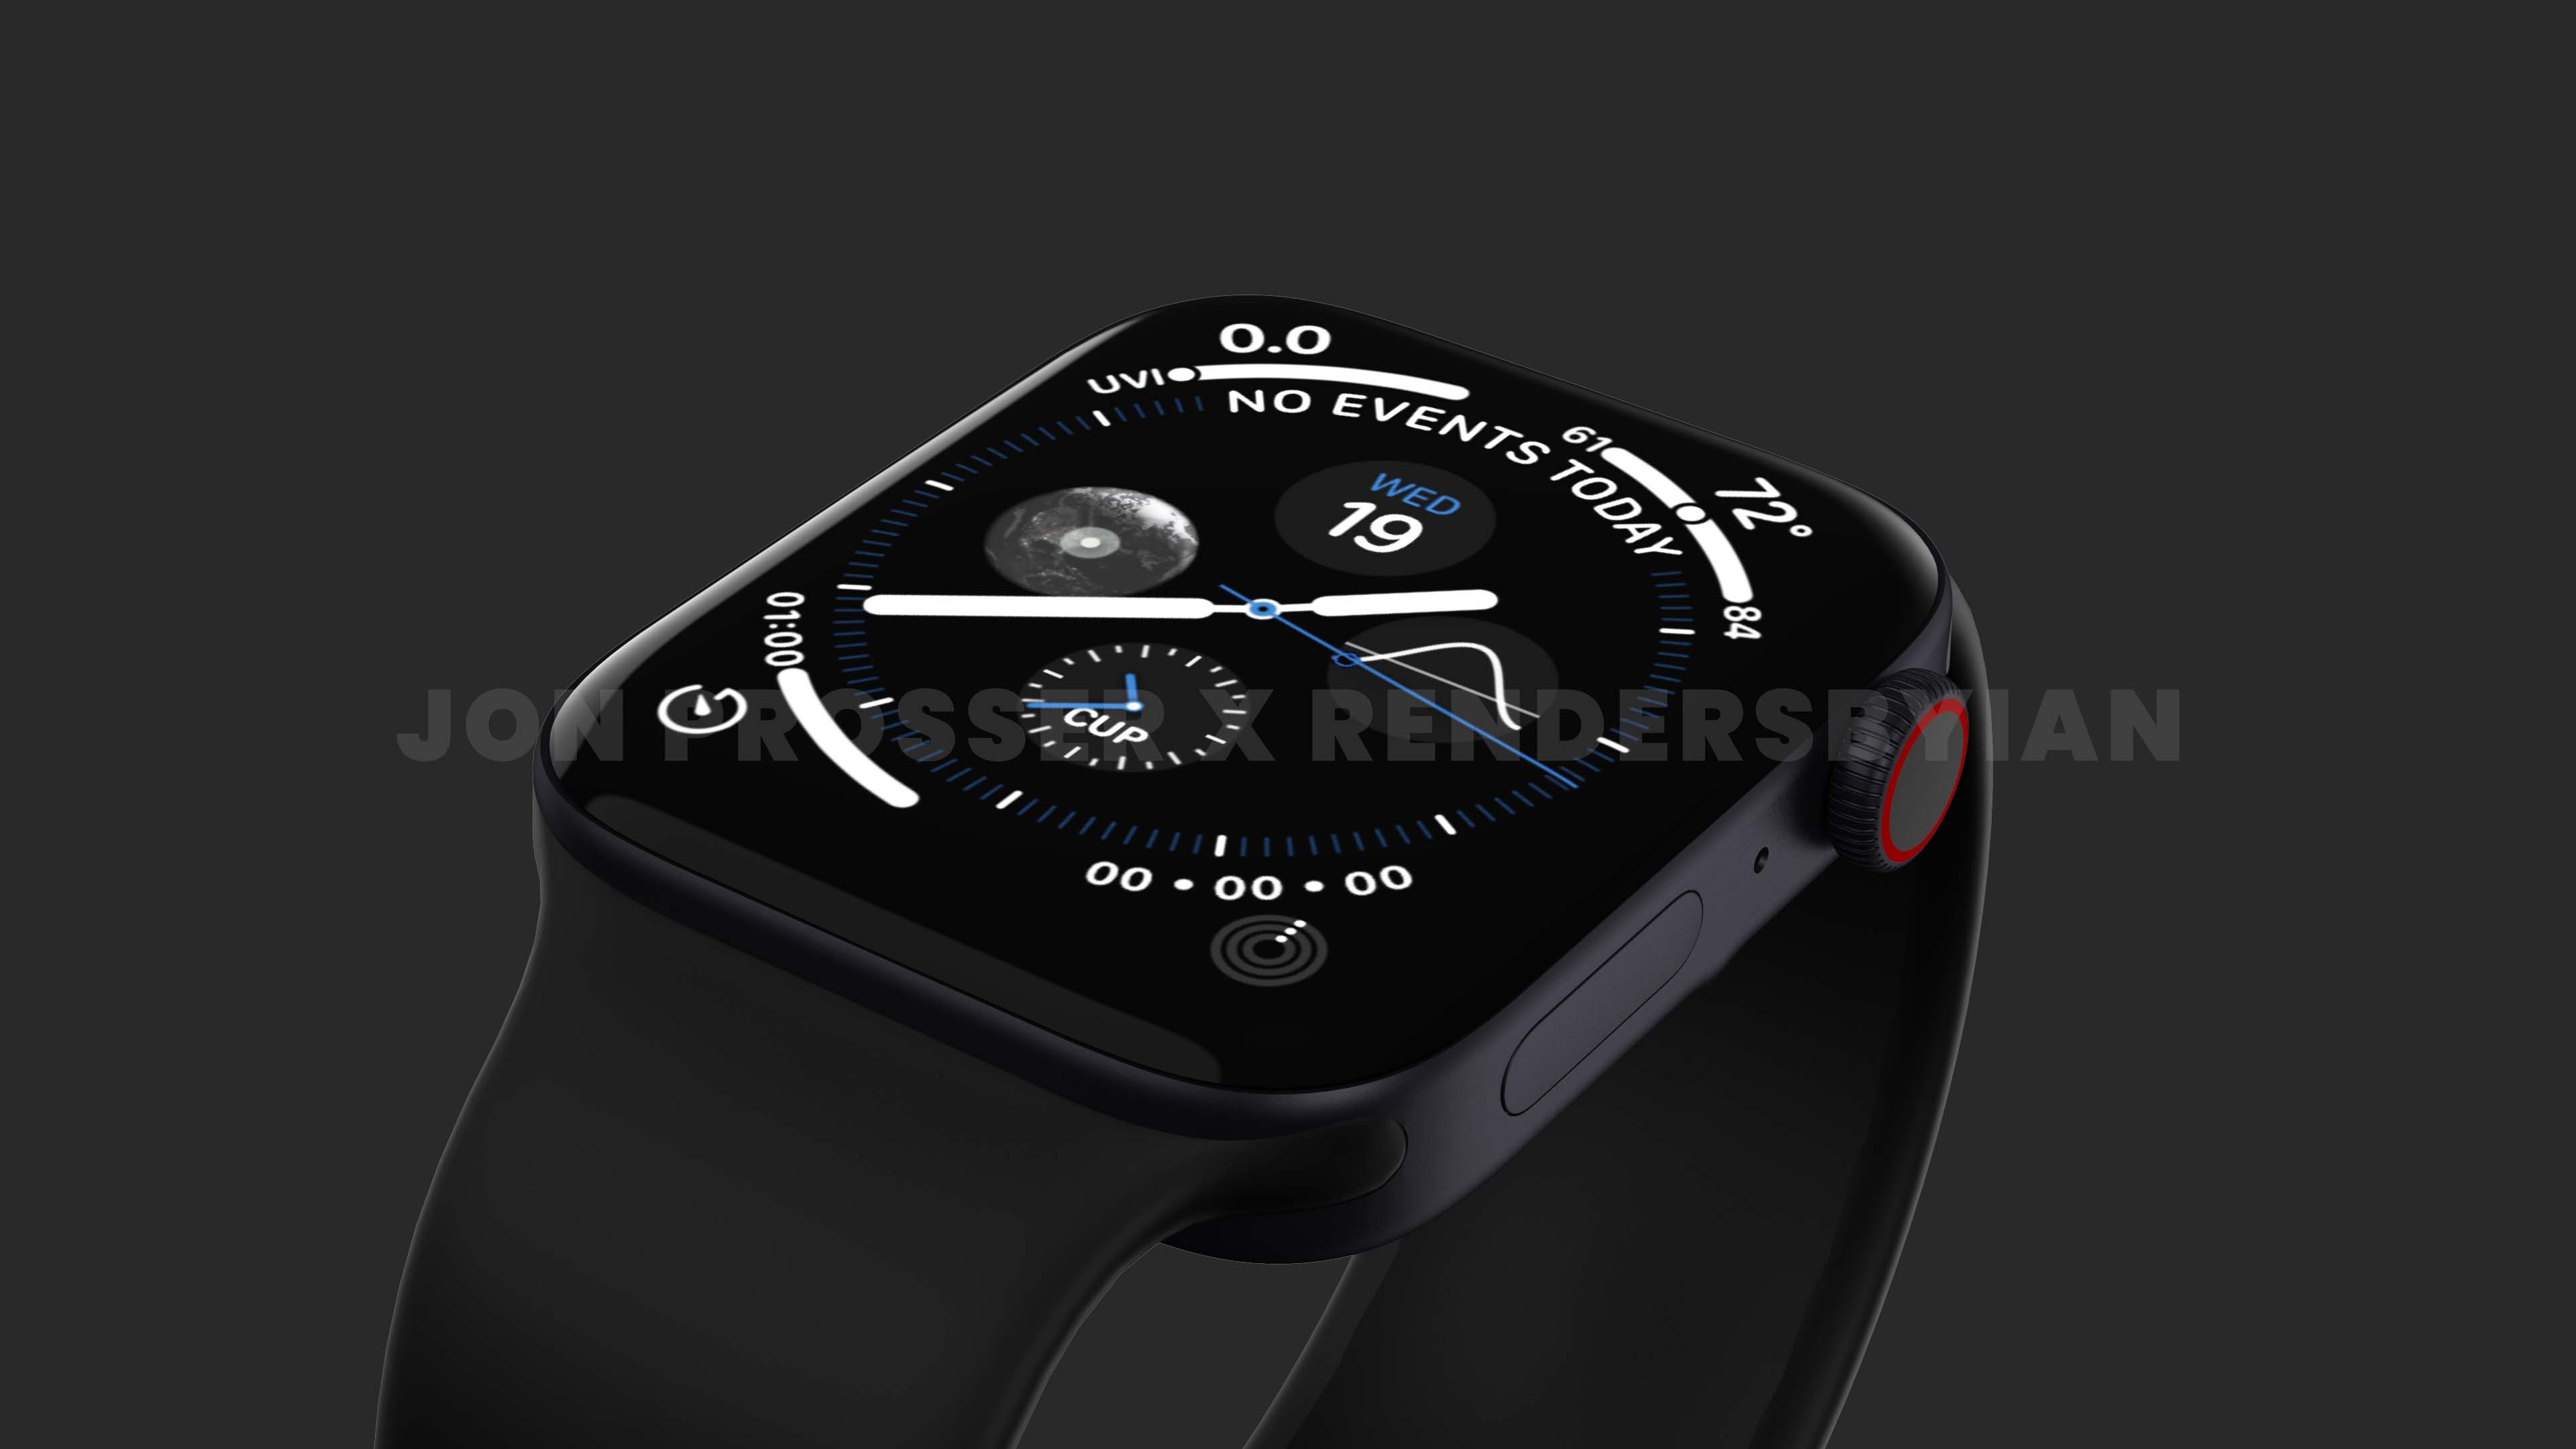 Apple Watch 7 demos were made based on alleged leaked images of the device